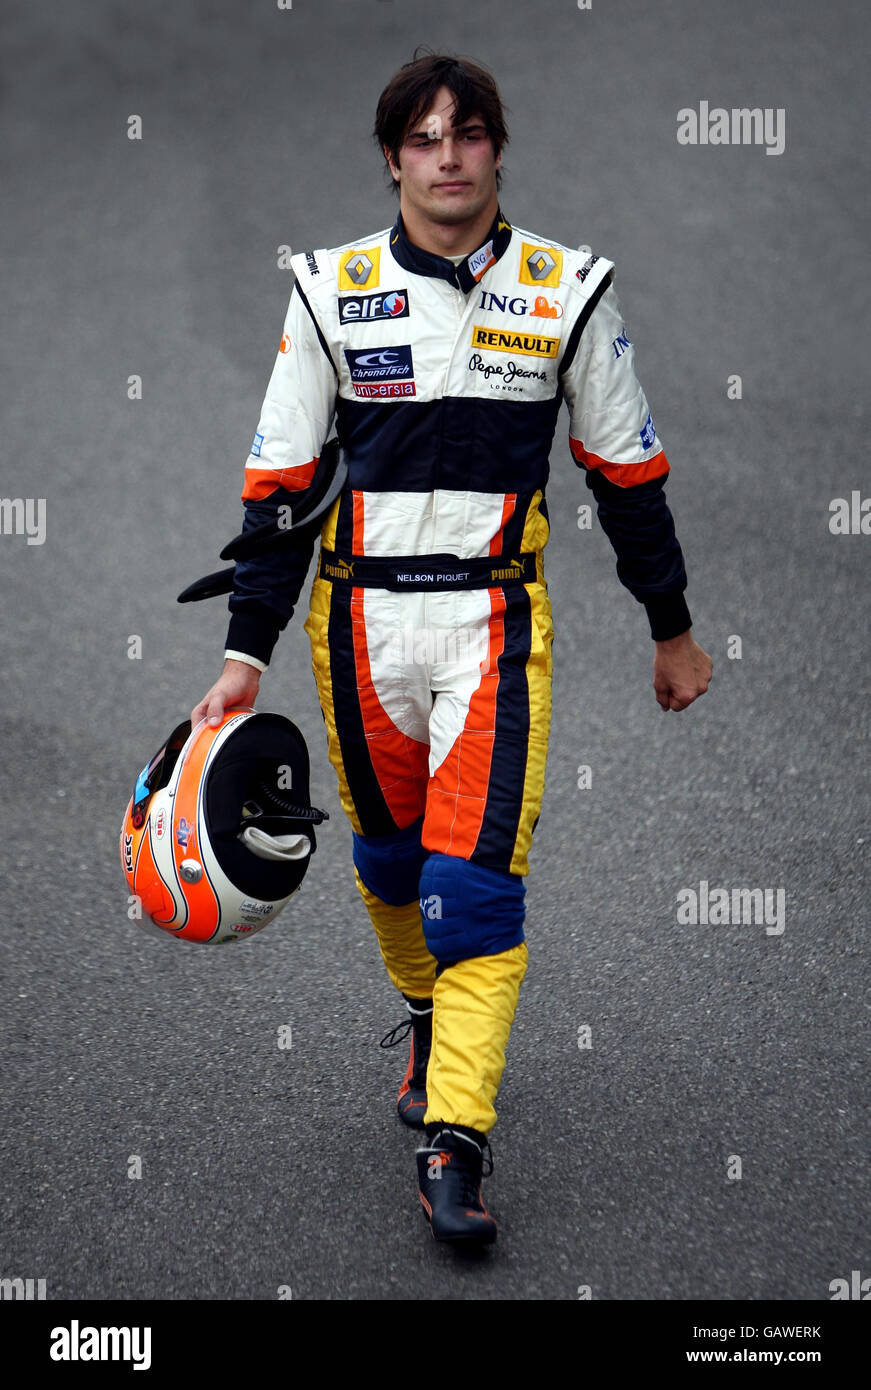 Formula One Motor Racing - French Grand Prix - Race - Magny Cours. Renault's Nelson Piquet after the Grand Prix at Magny-Cours, Nevers, France. Stock Photo